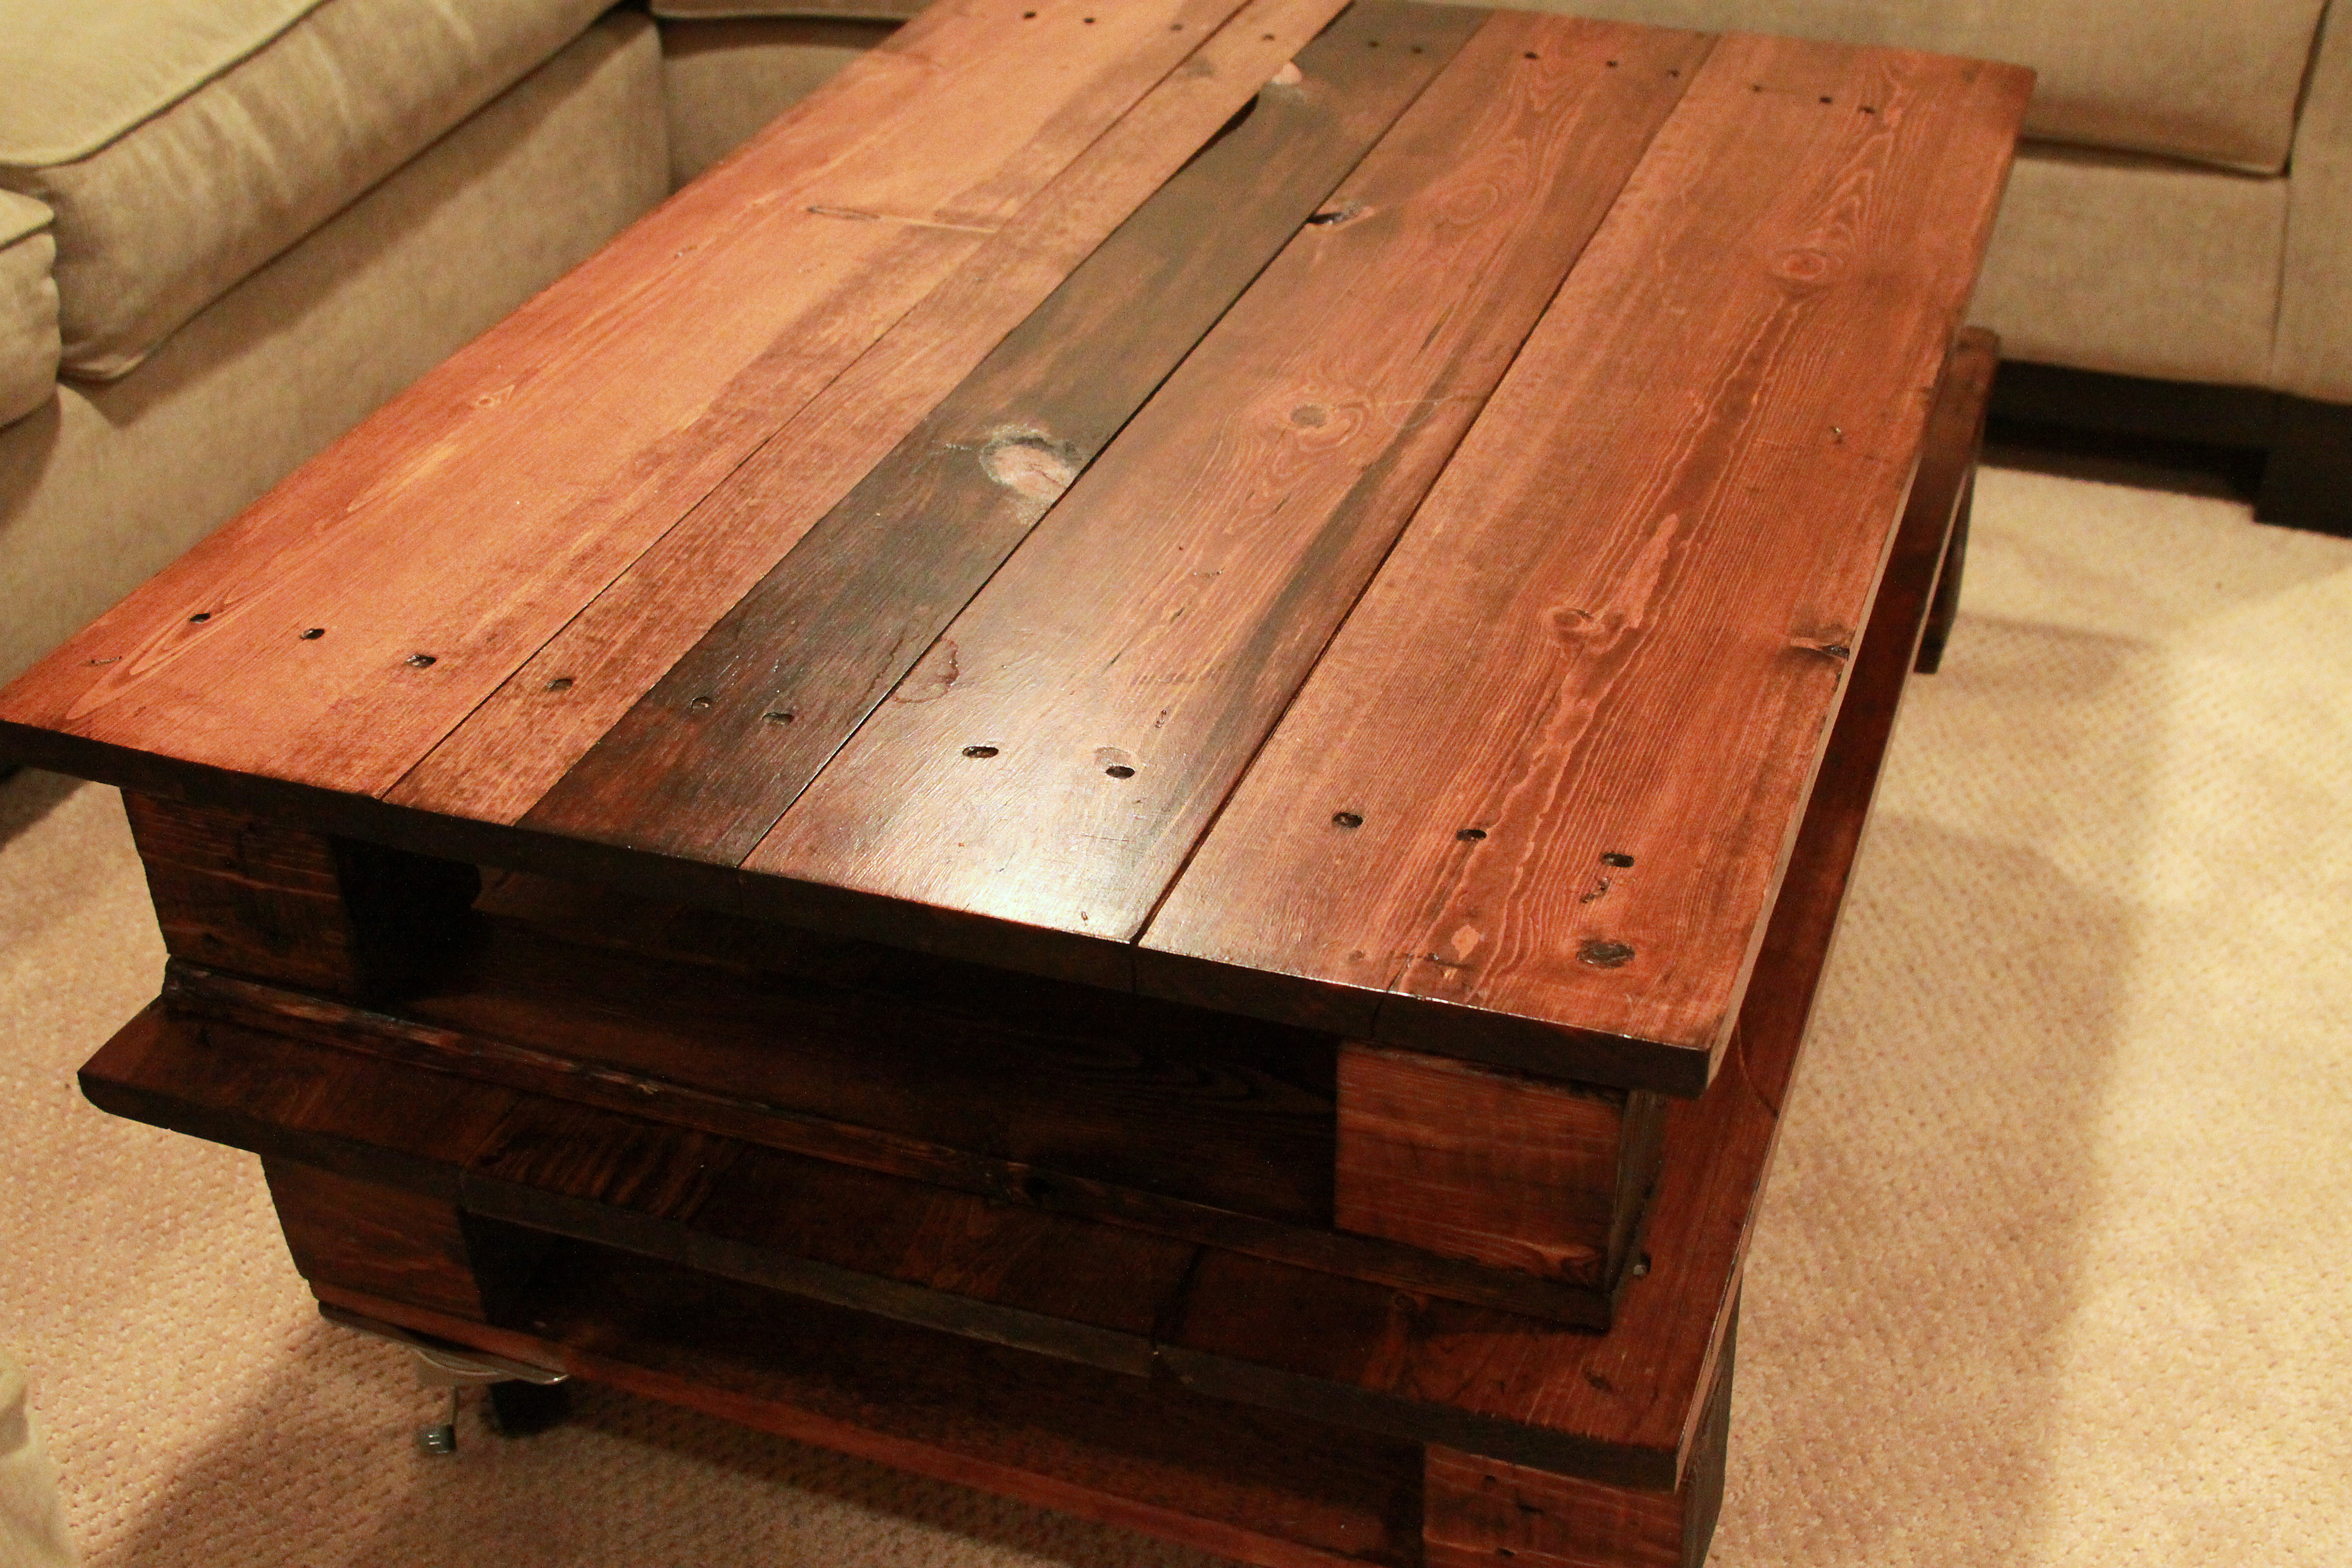 Build a wooden coffee table – free woodworking plans at 